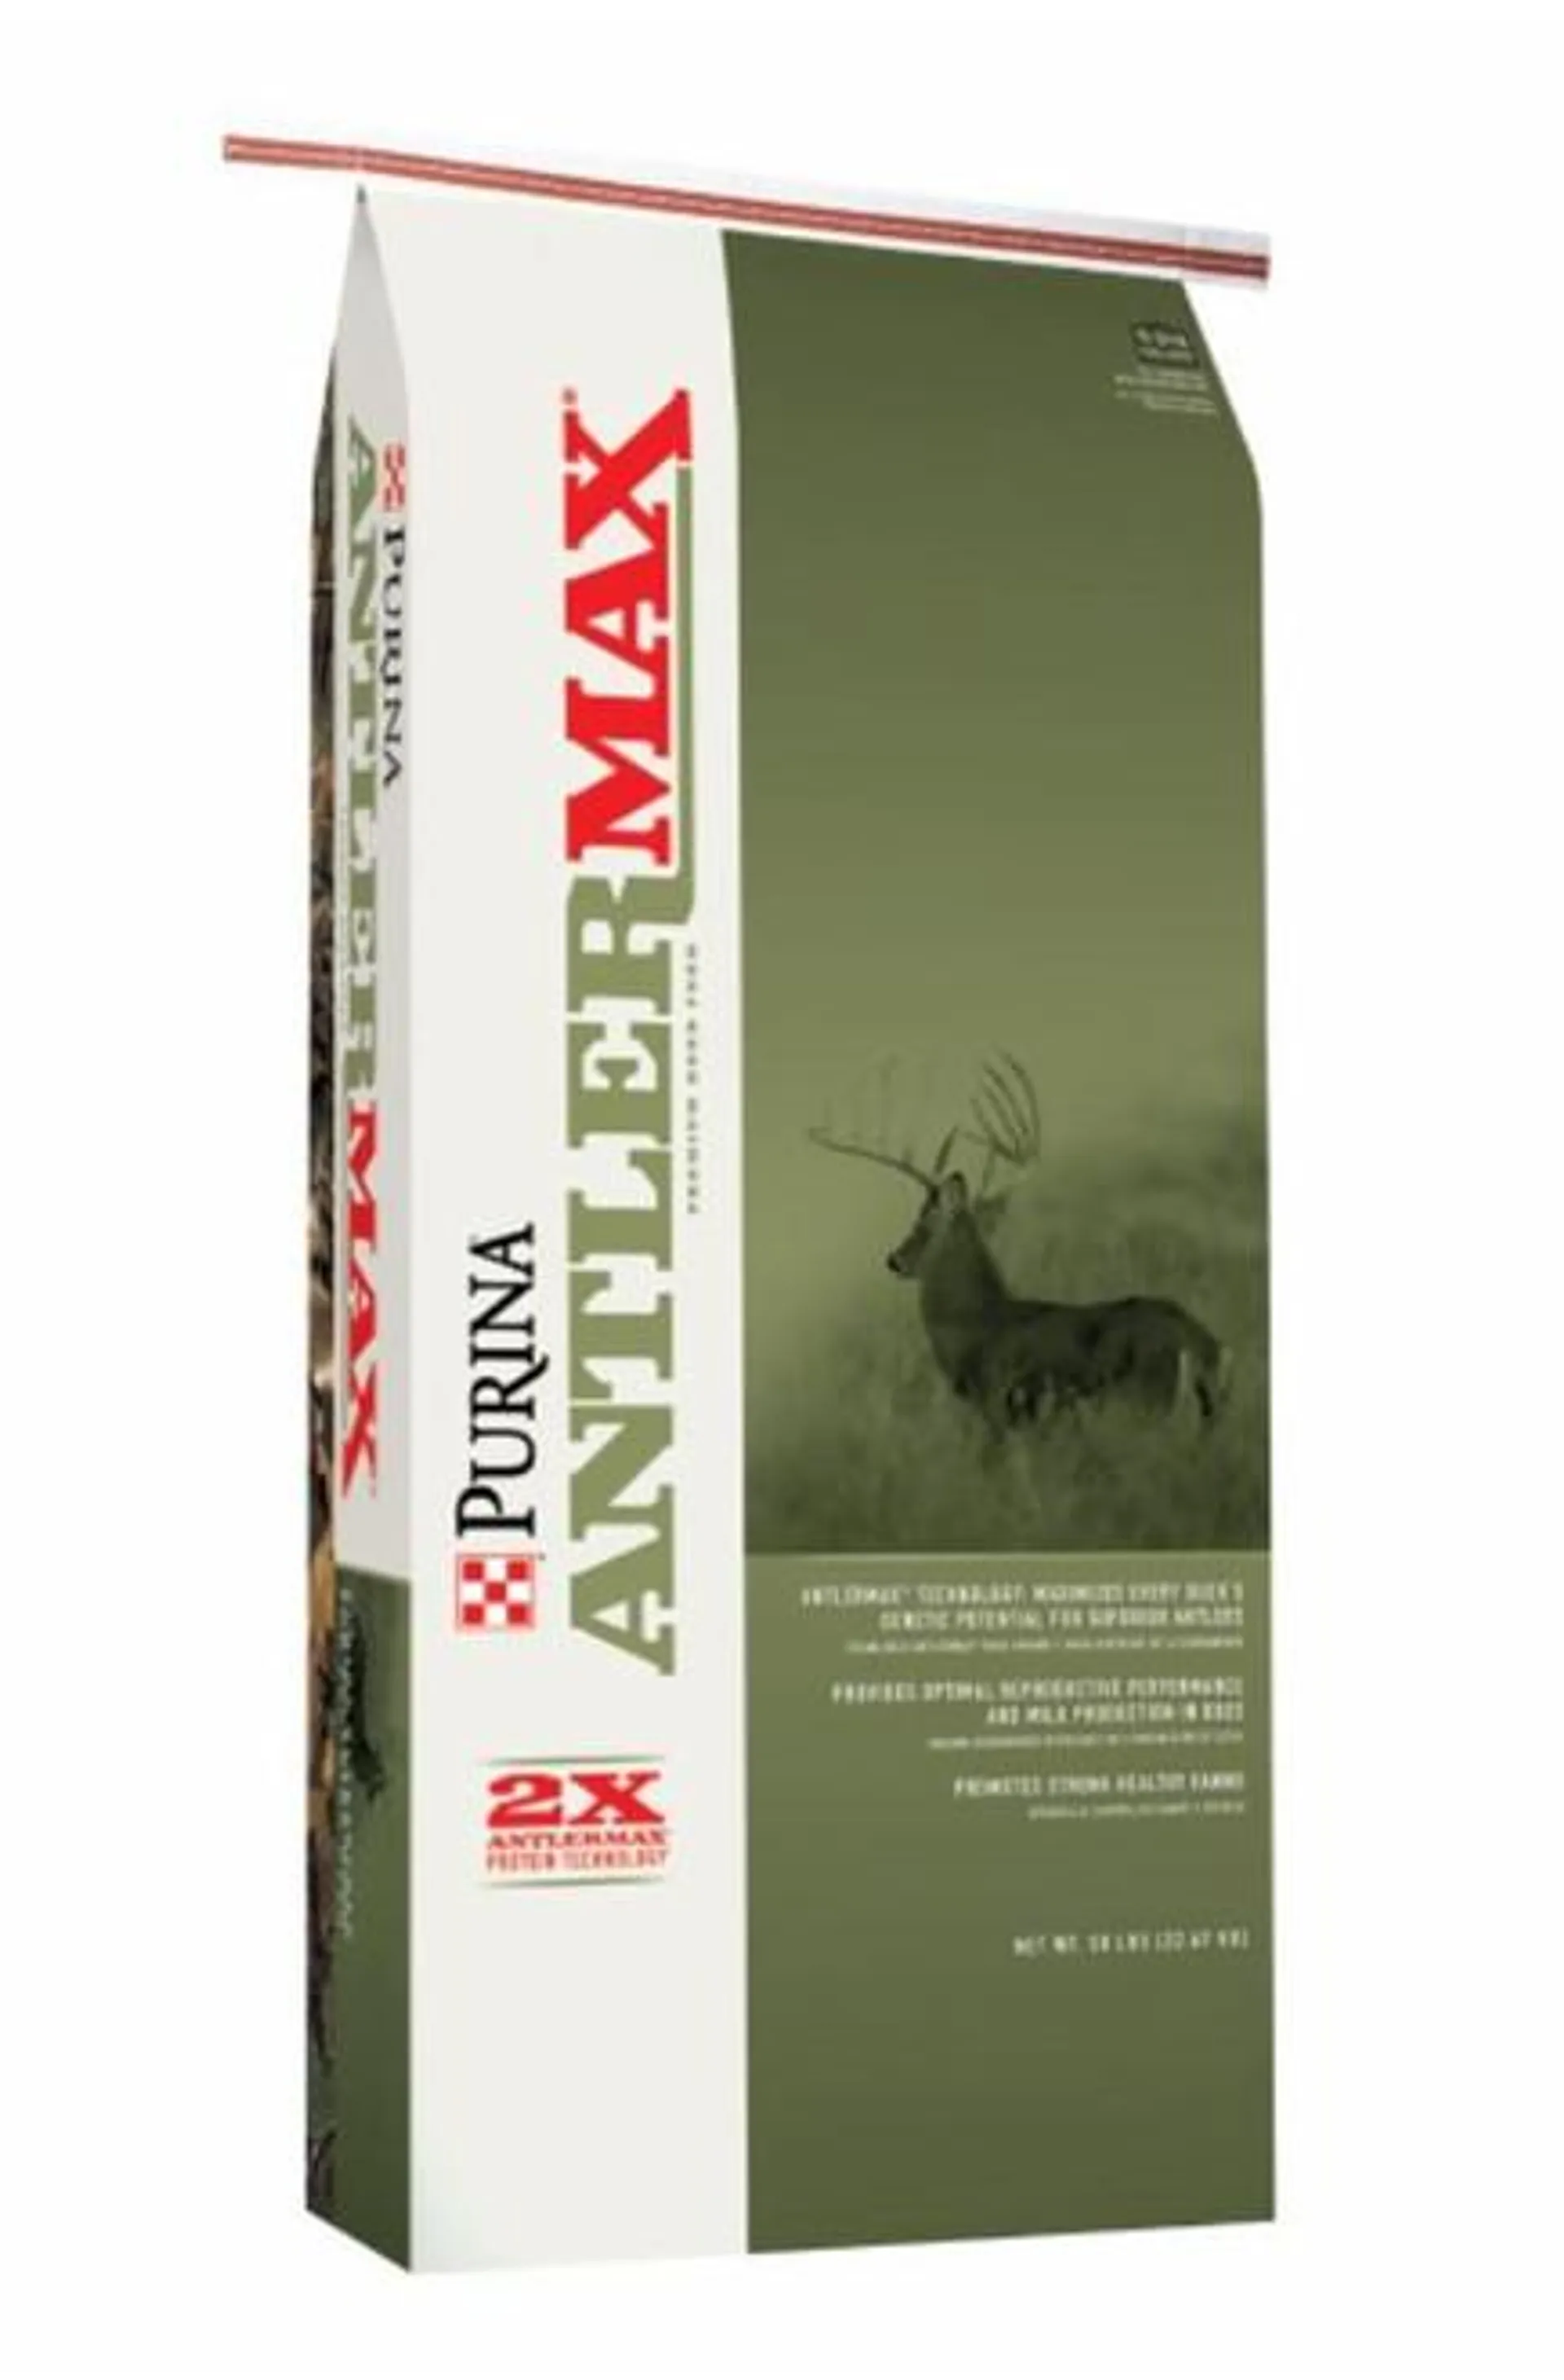 Purina Antler Max Mule Deer Pellets 22% Protein Feed with Climate Guard - 50 lb.